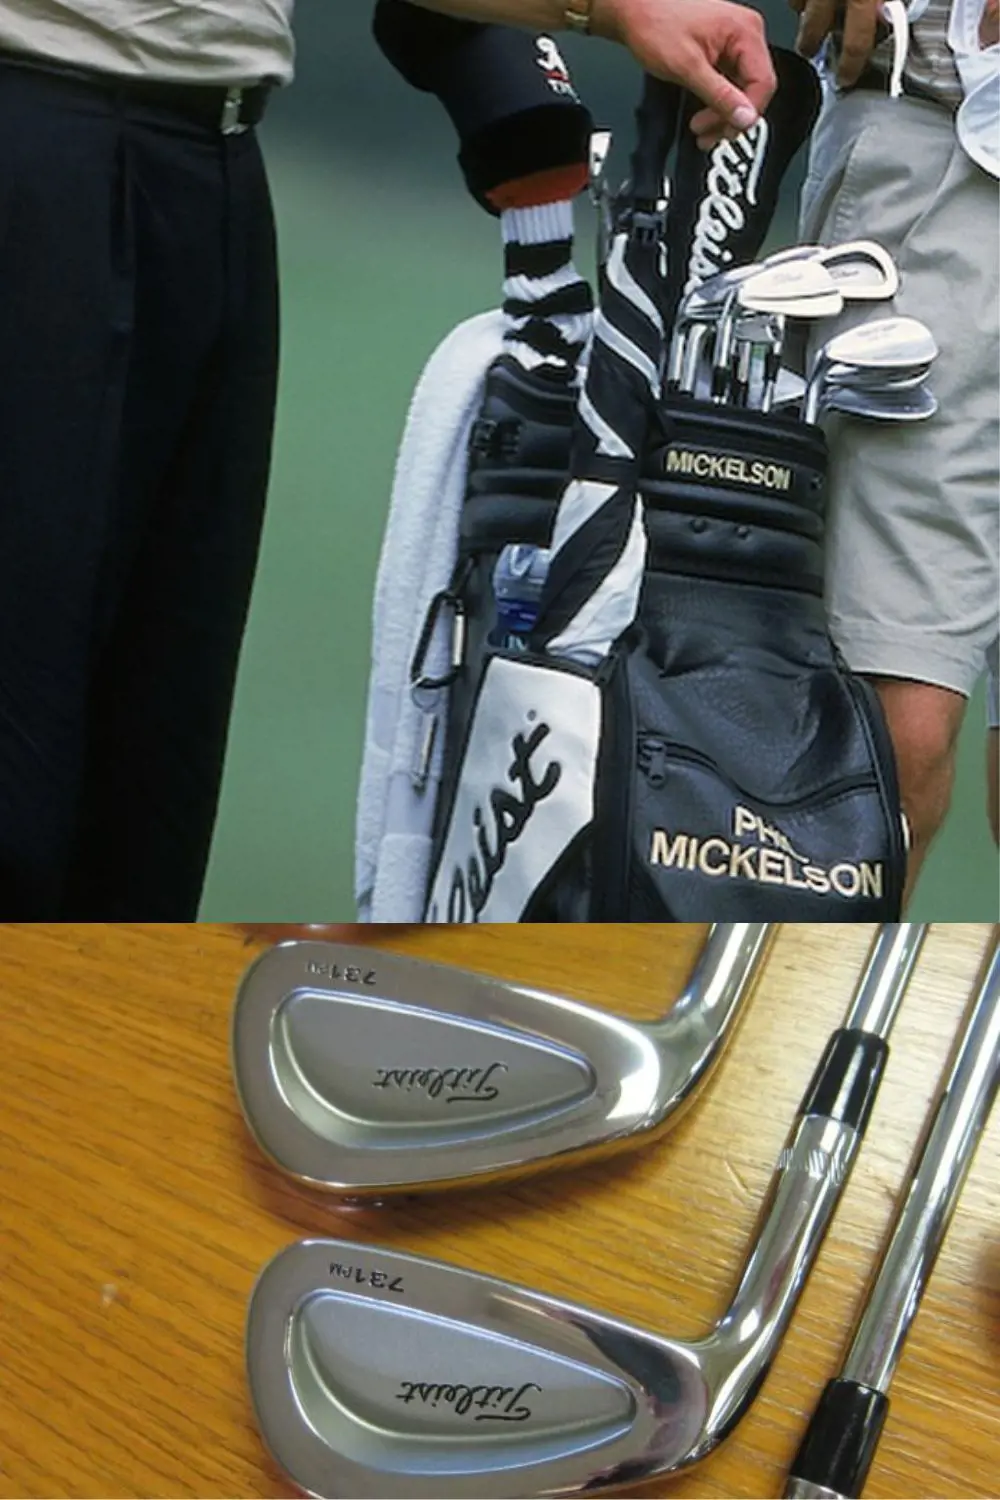 Phil Mickelson 731PM irons from Titleist back in the early 2000s